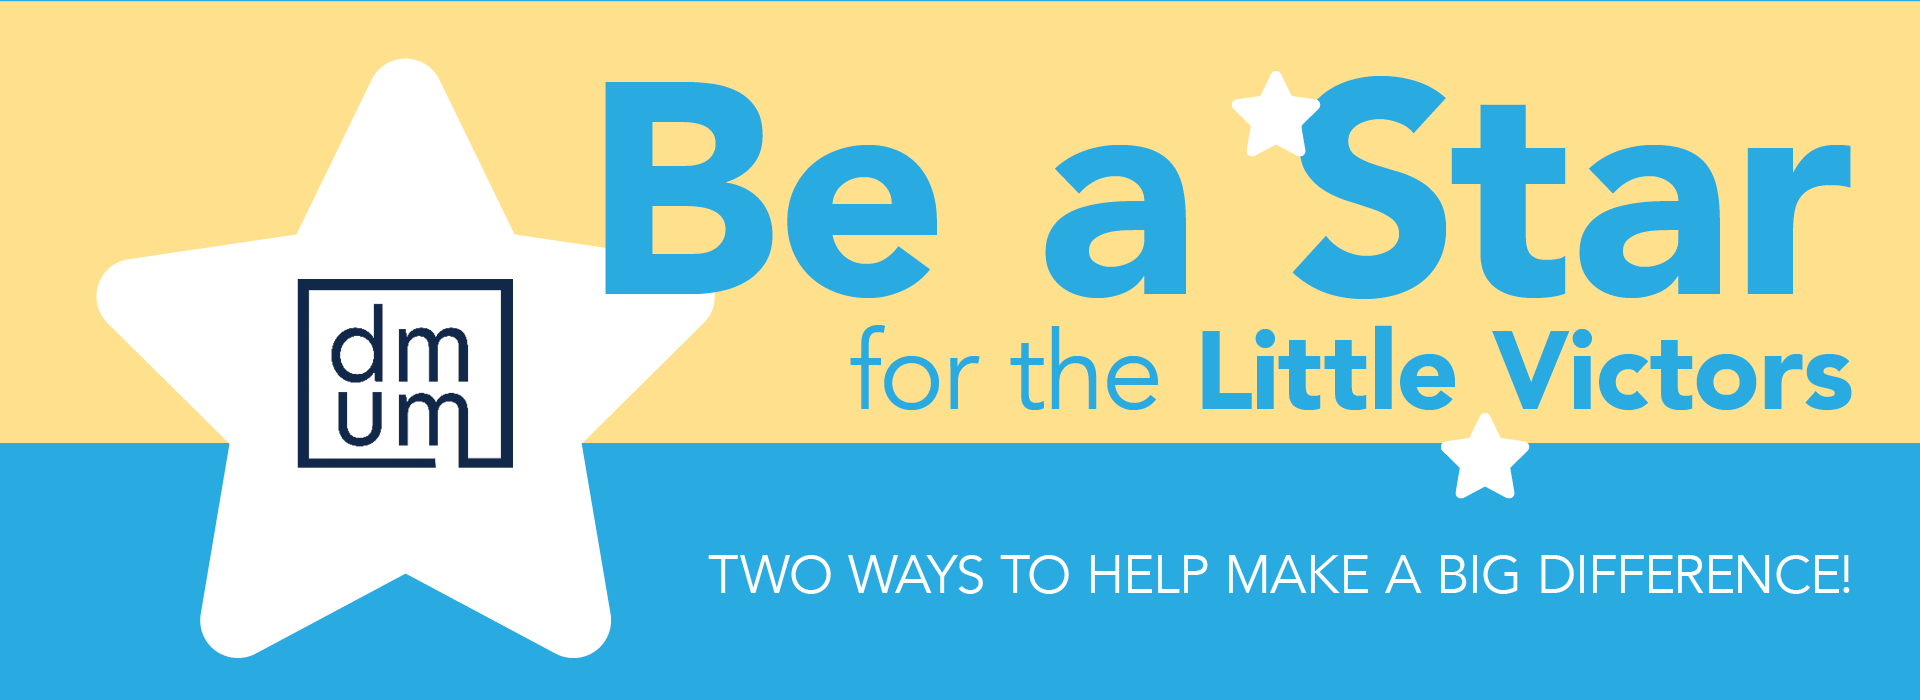 Be a star for the Little Victors two ways to support Dance Marathon at the University of Michigan